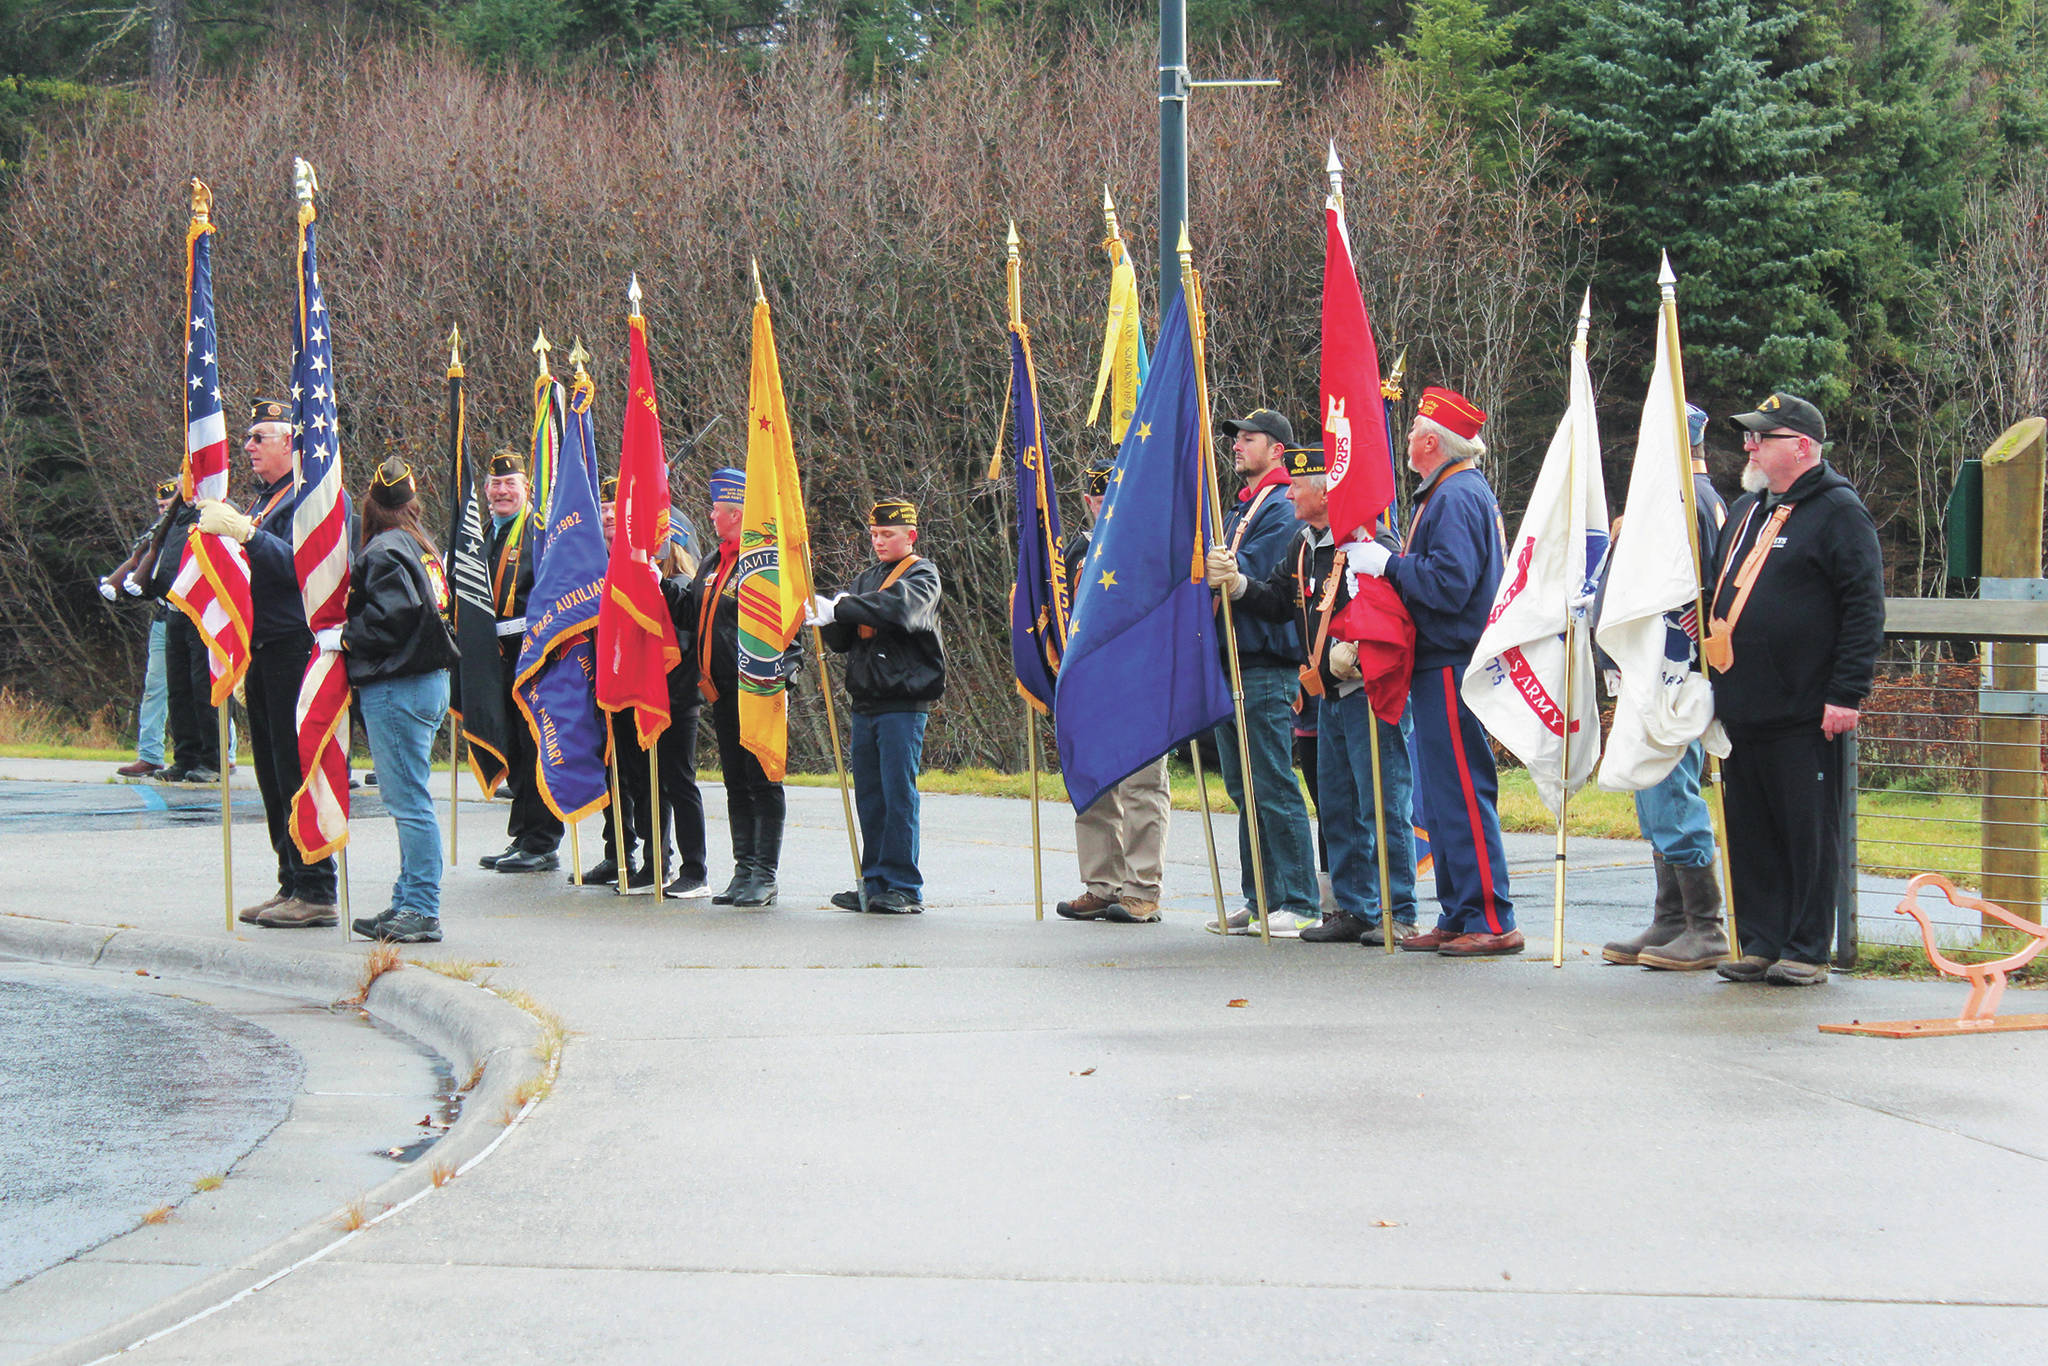 Participants in this year’s Veterans Day celebration assemble at the Alaska Islands & Ocean Visitor Center on Wednesday, Nov. 11, 2020 in Homer, Alaska. (Photo by Megan Pacer/Homer News)